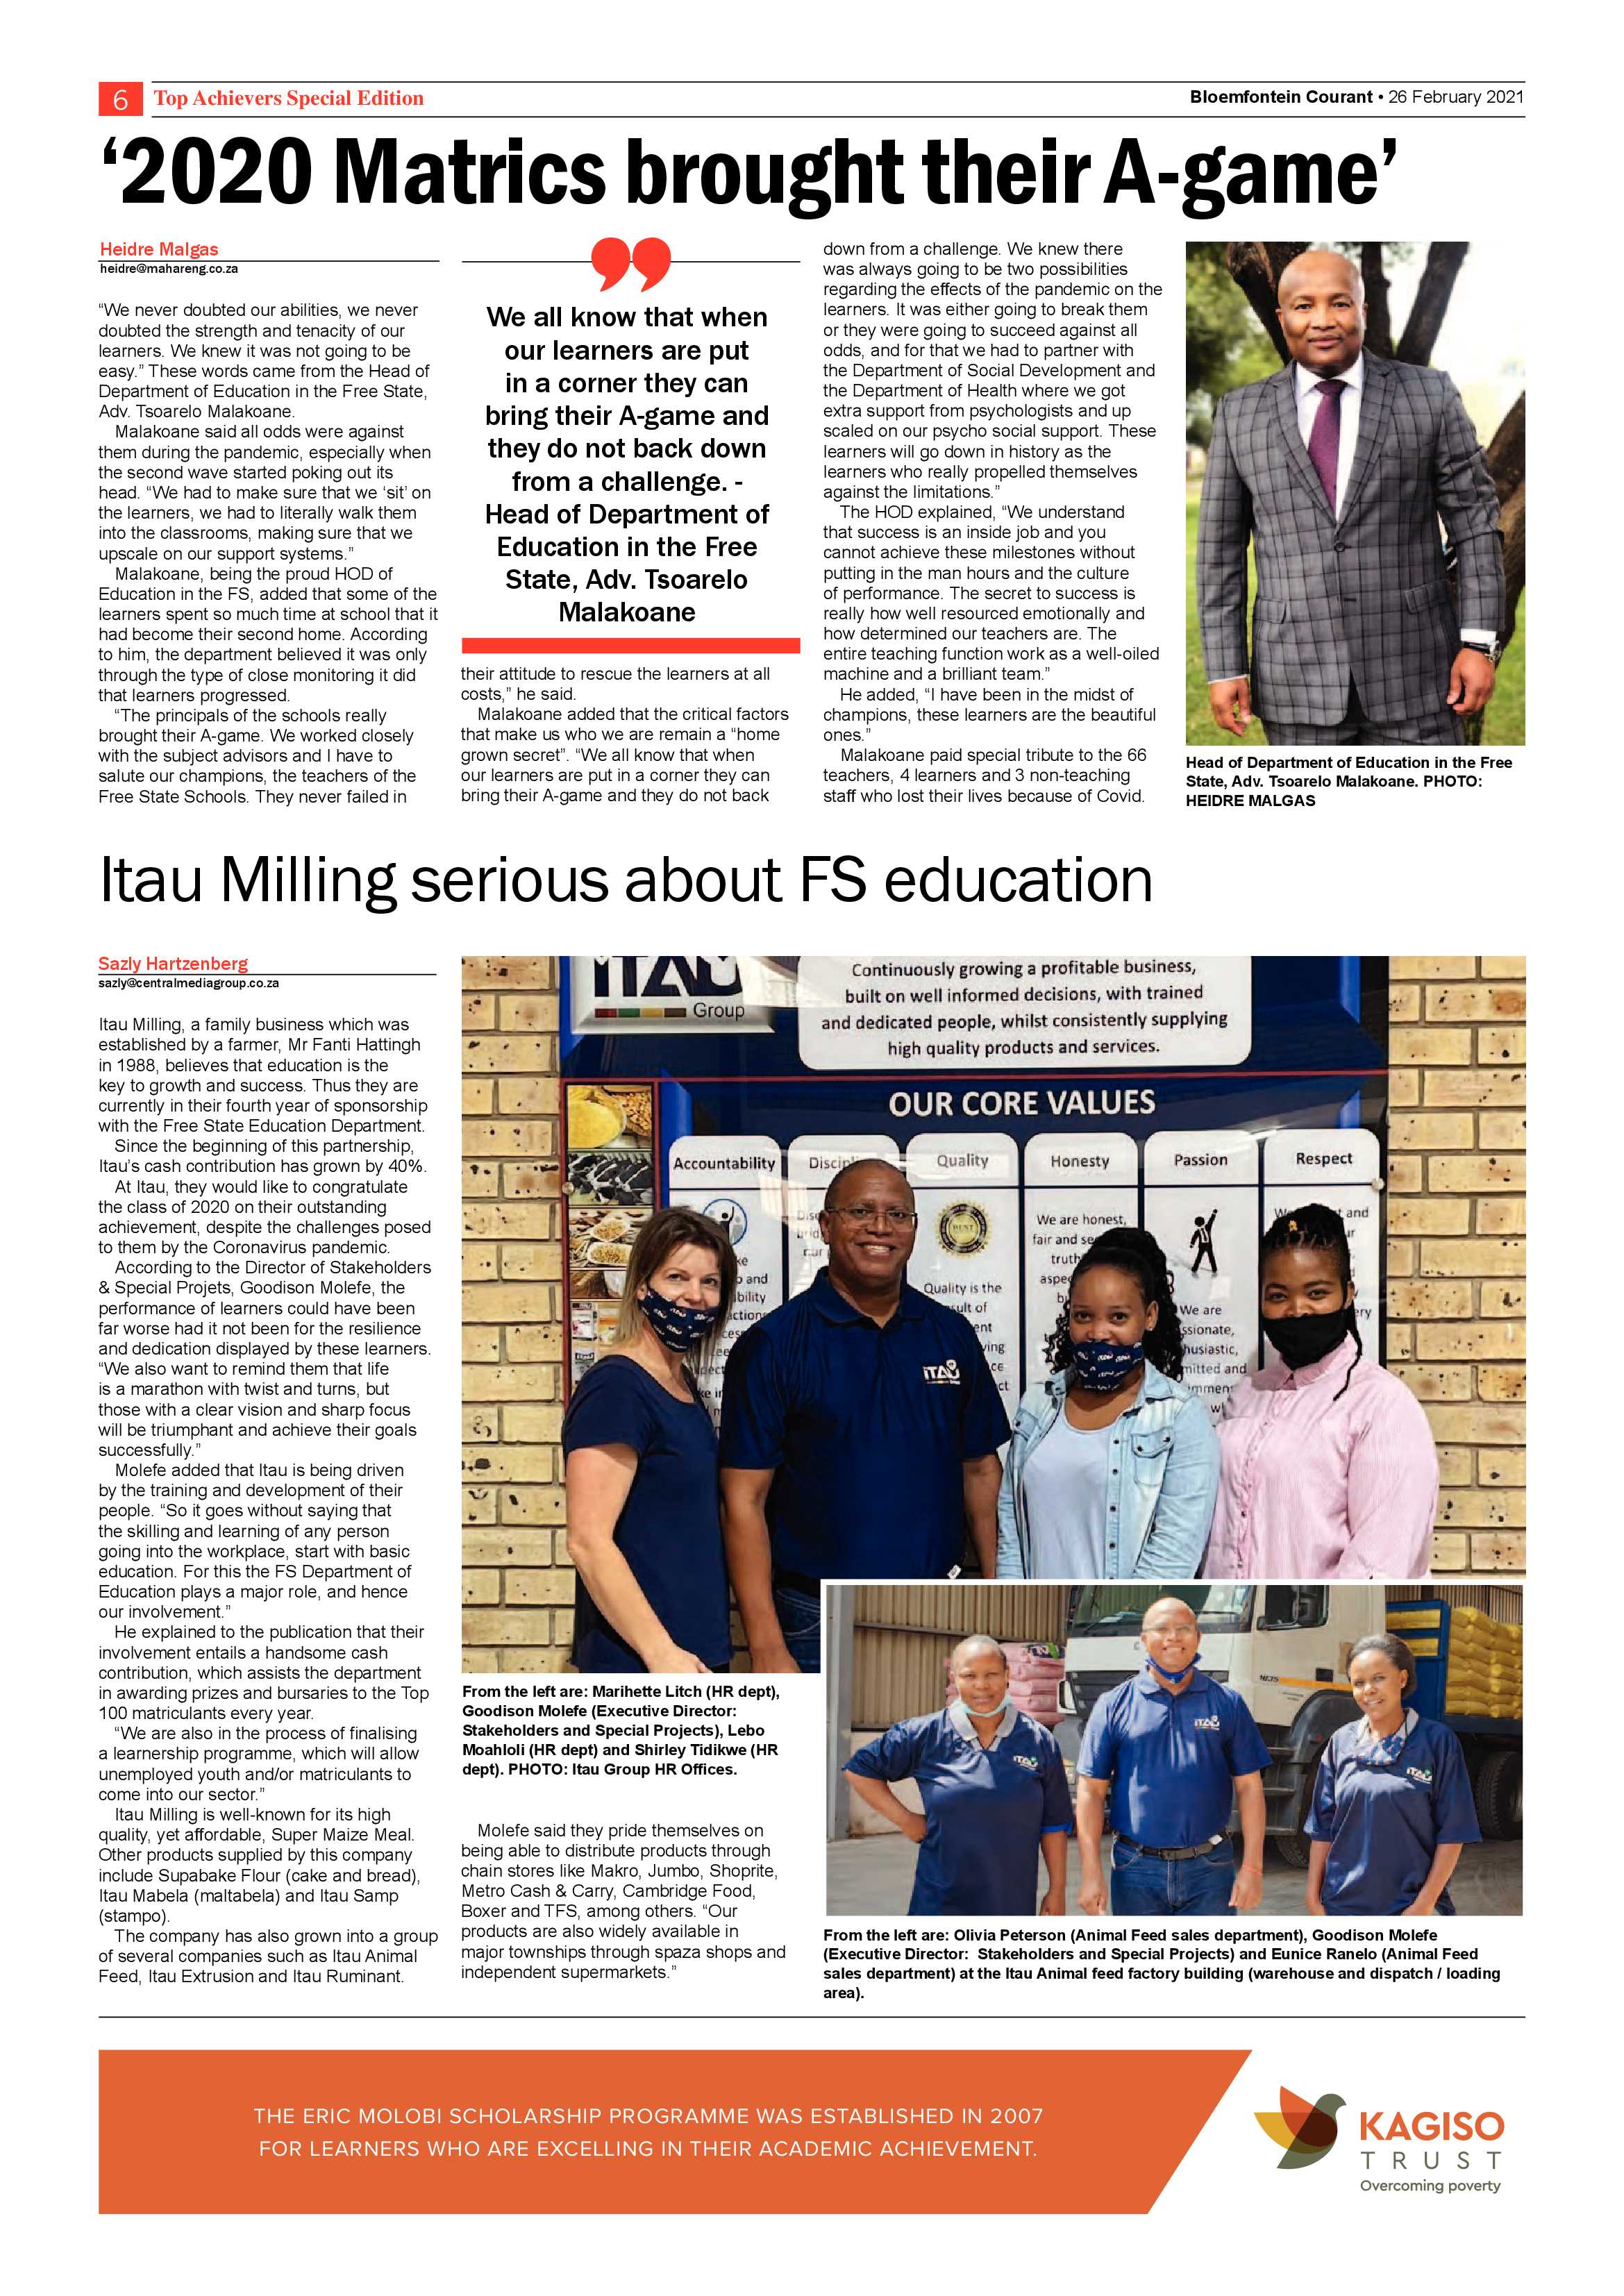 bloemfontein-courant-special-top-achievers-epapers-page-6